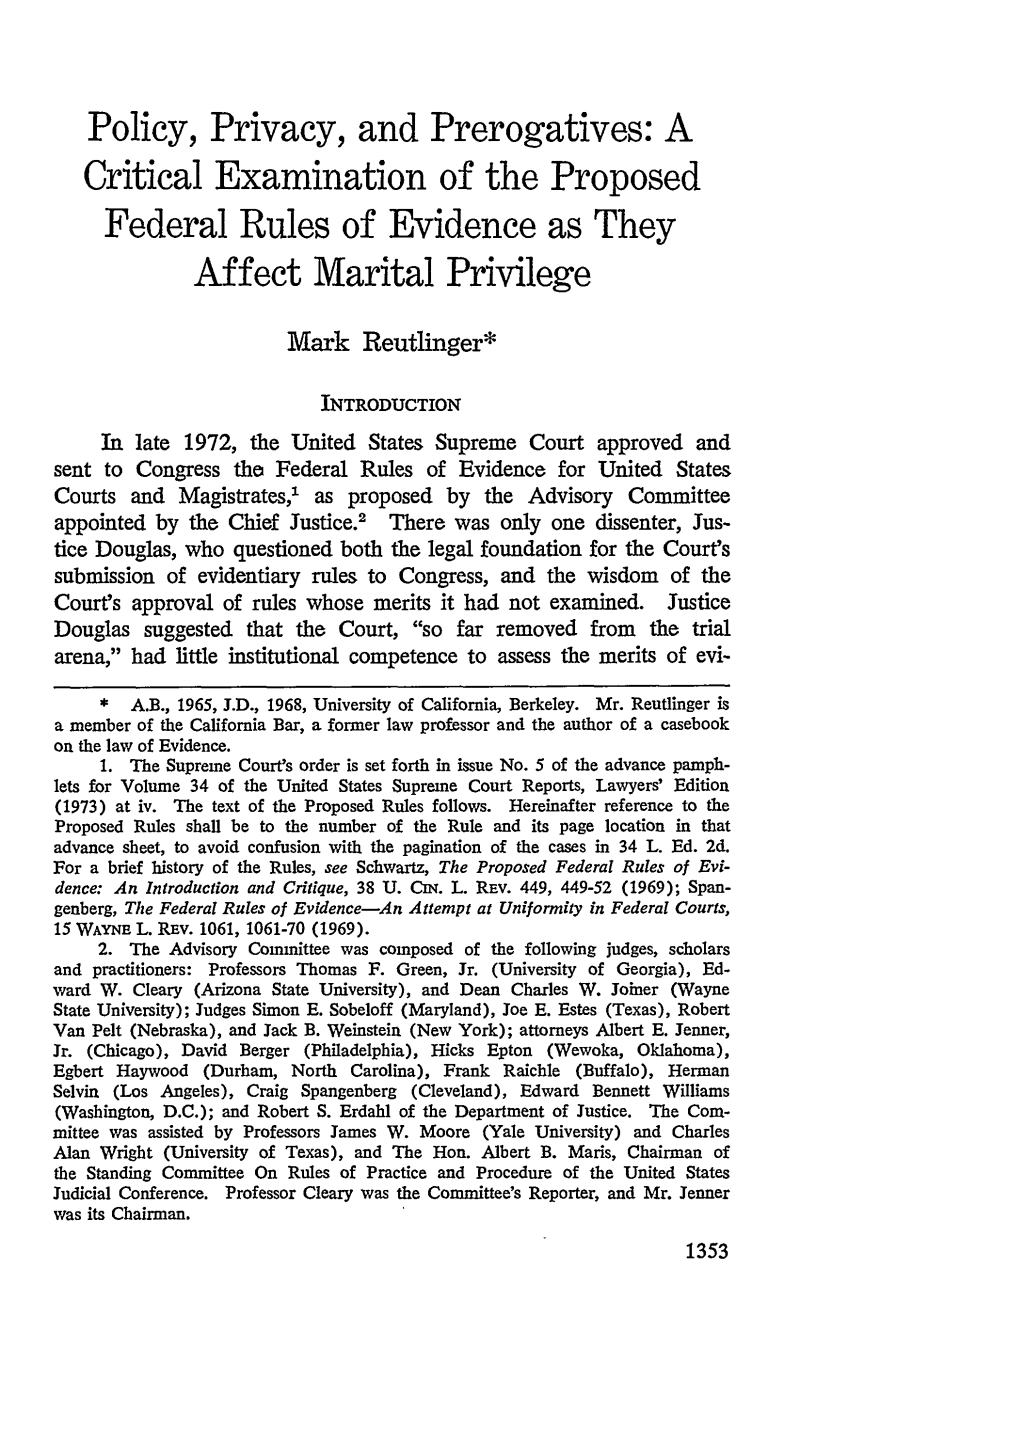 A Critical Examination of the Proposed Federal Rules of Evidence As They Affect Marital Privilege